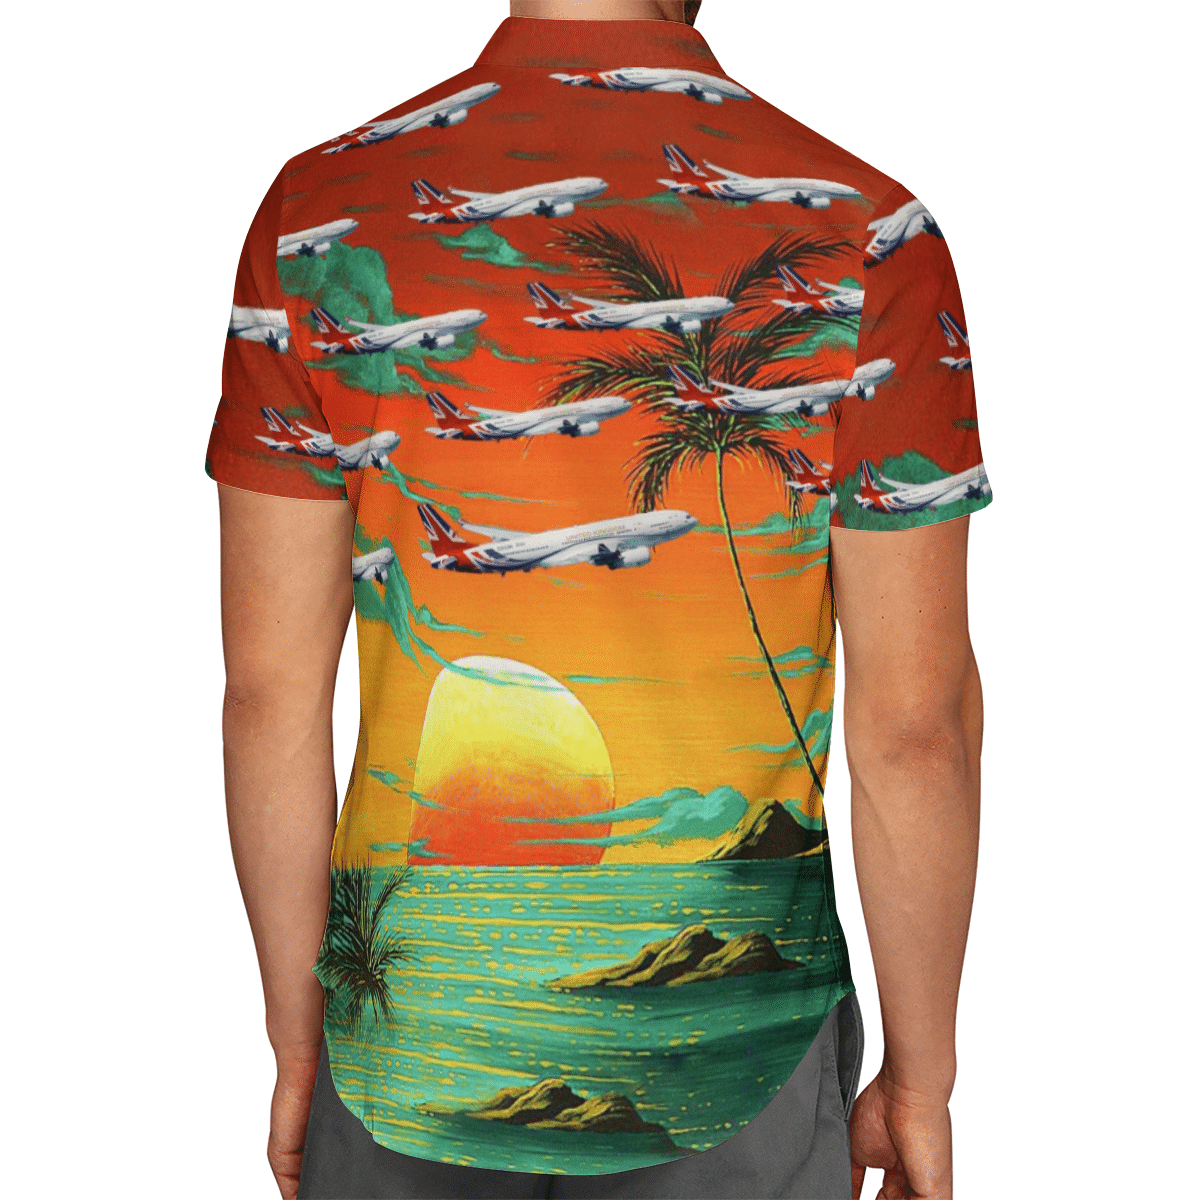 Going to the beach with a quality shirt 172